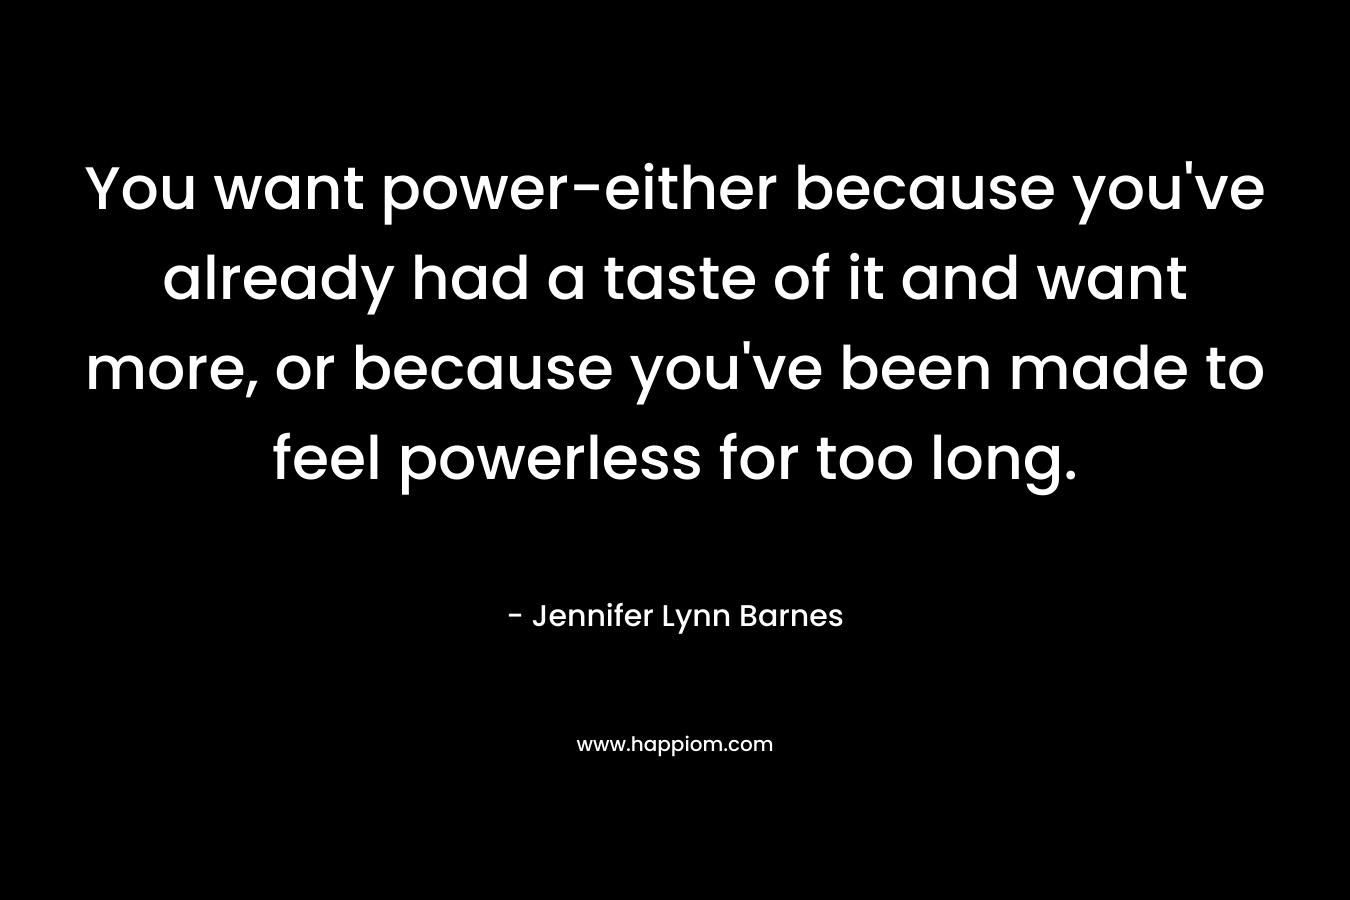 You want power-either because you’ve already had a taste of it and want more, or because you’ve been made to feel powerless for too long. – Jennifer Lynn Barnes